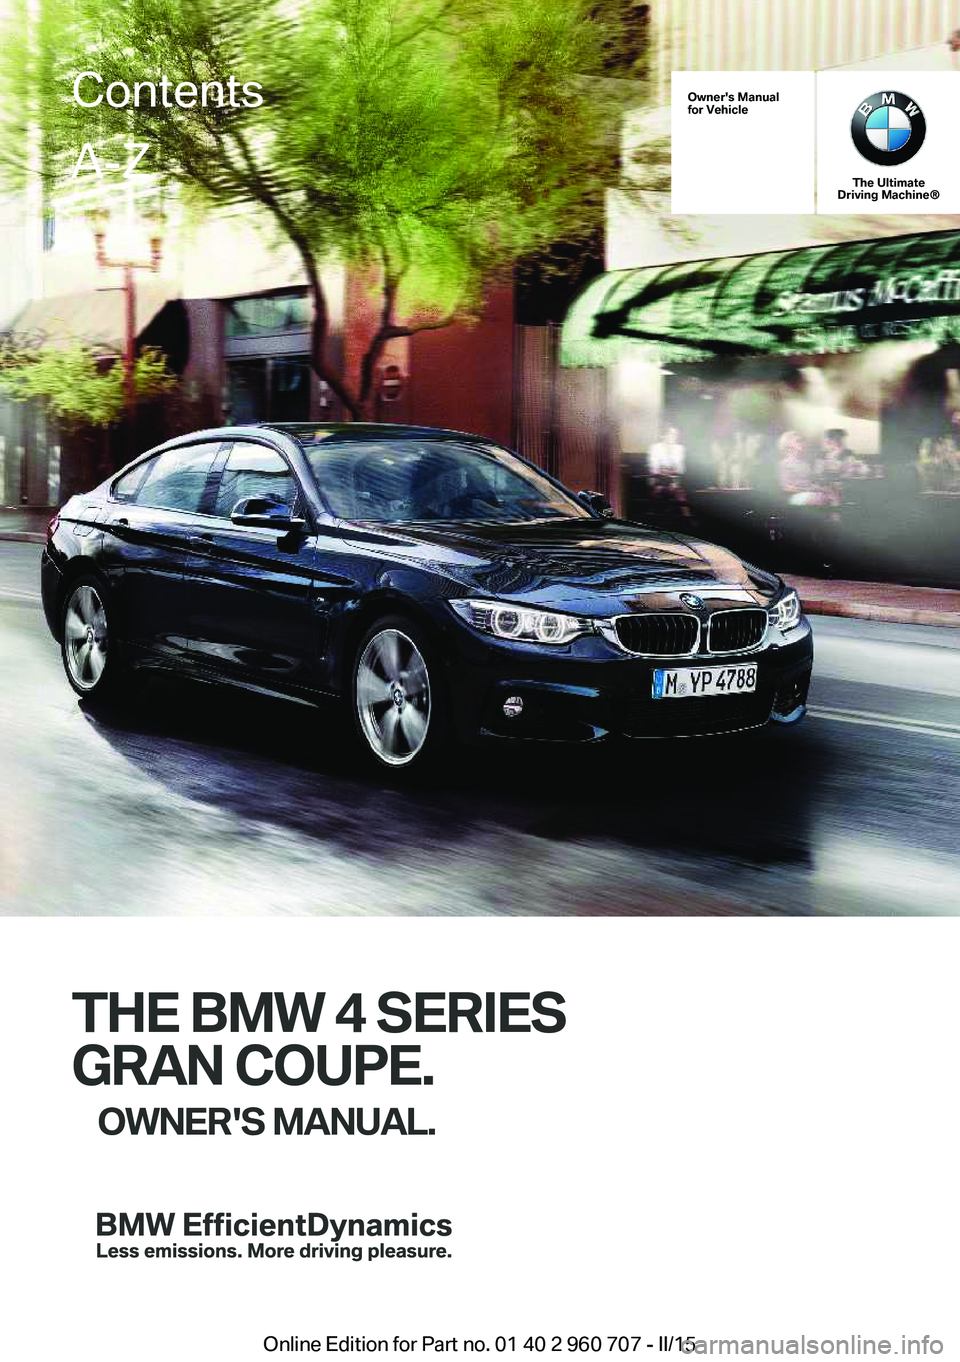 BMW 435I GRAN COUPE 2016  Owners Manual Owner's Manual
for Vehicle
The Ultimate
Driving Machine®
THE BMW 4 SERIES
GRAN COUPE. OWNER'S MANUAL.
ContentsA-Z
Online Edition for Part no. 01 40 2 960 707 - II/15   